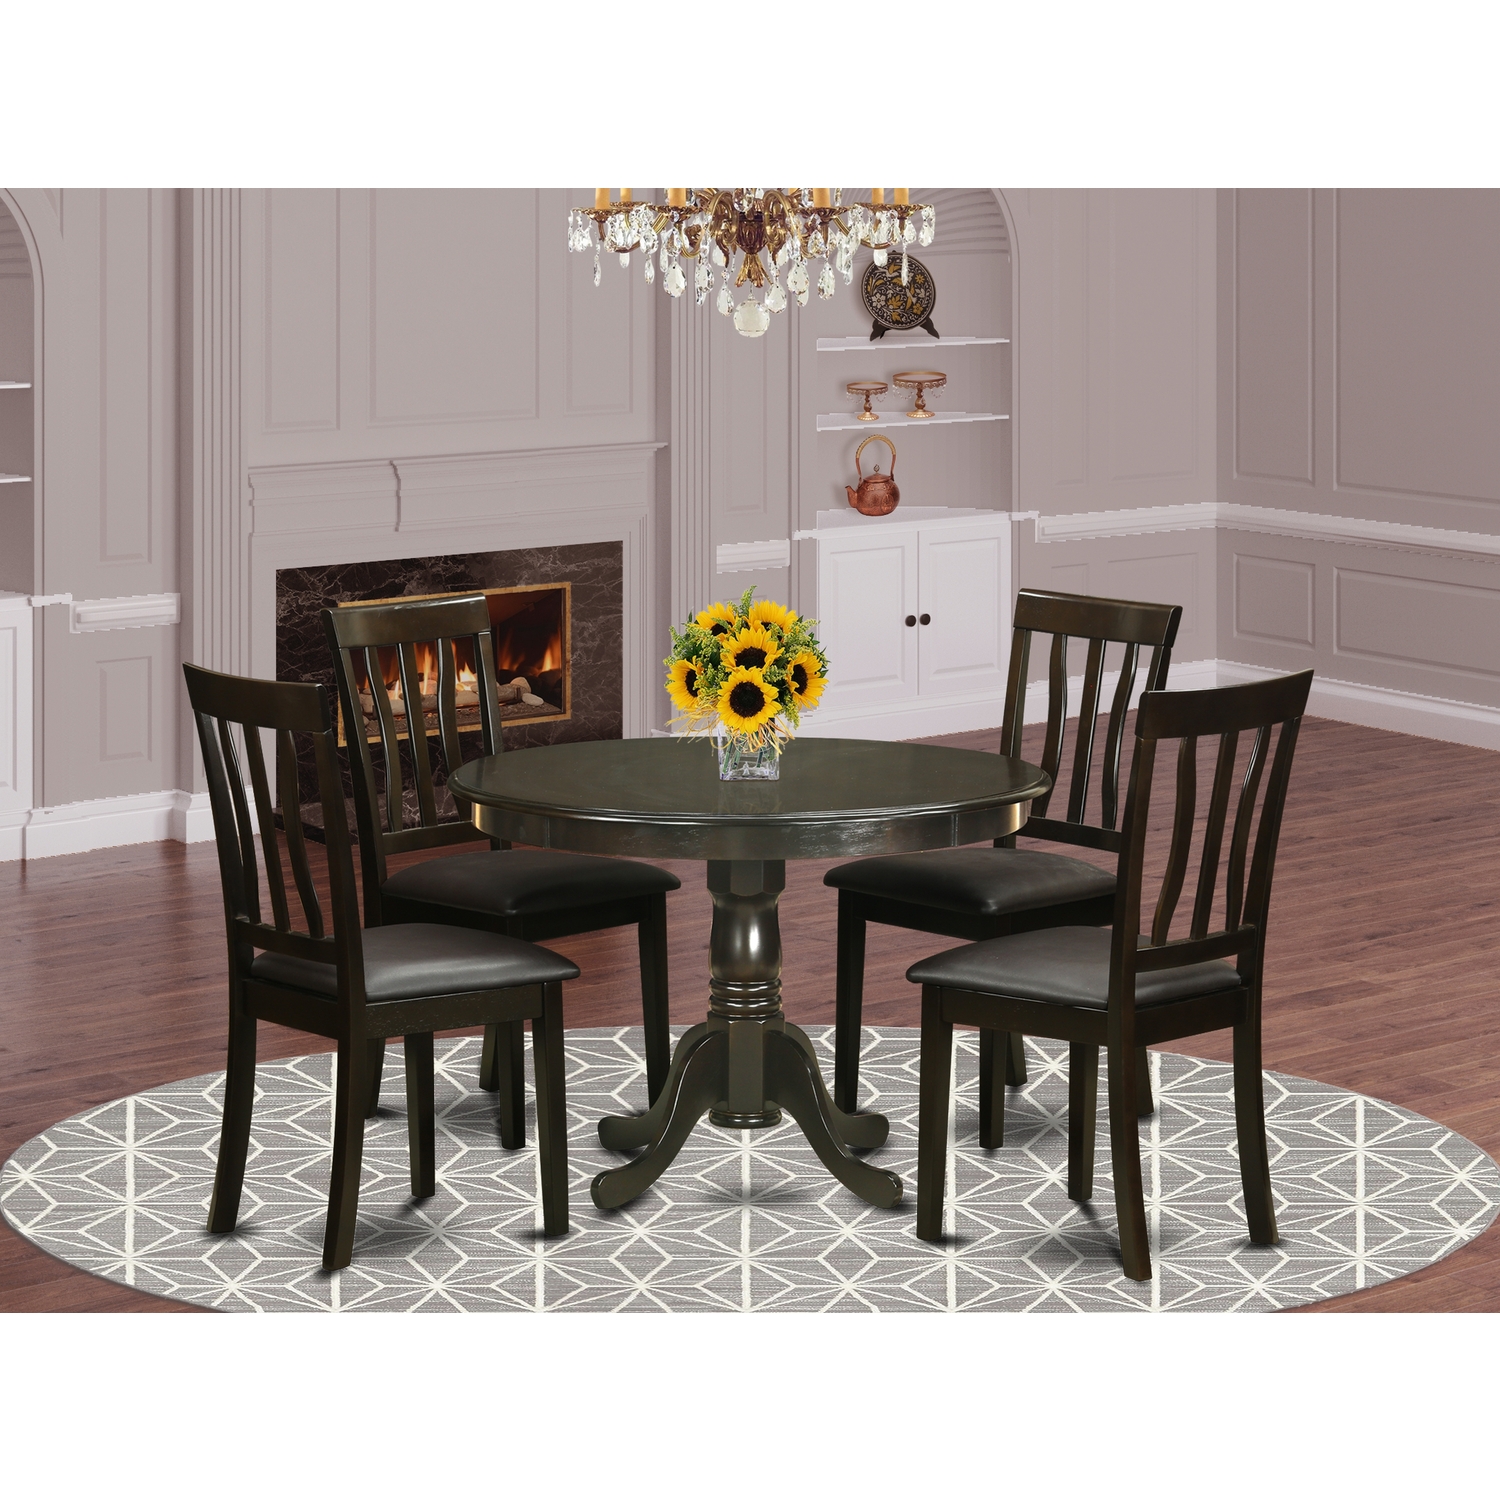 5 Pc small Kitchen Table and Chairs set--small Kitchen Table and 4 dinette Chairs. - image 1 of 5